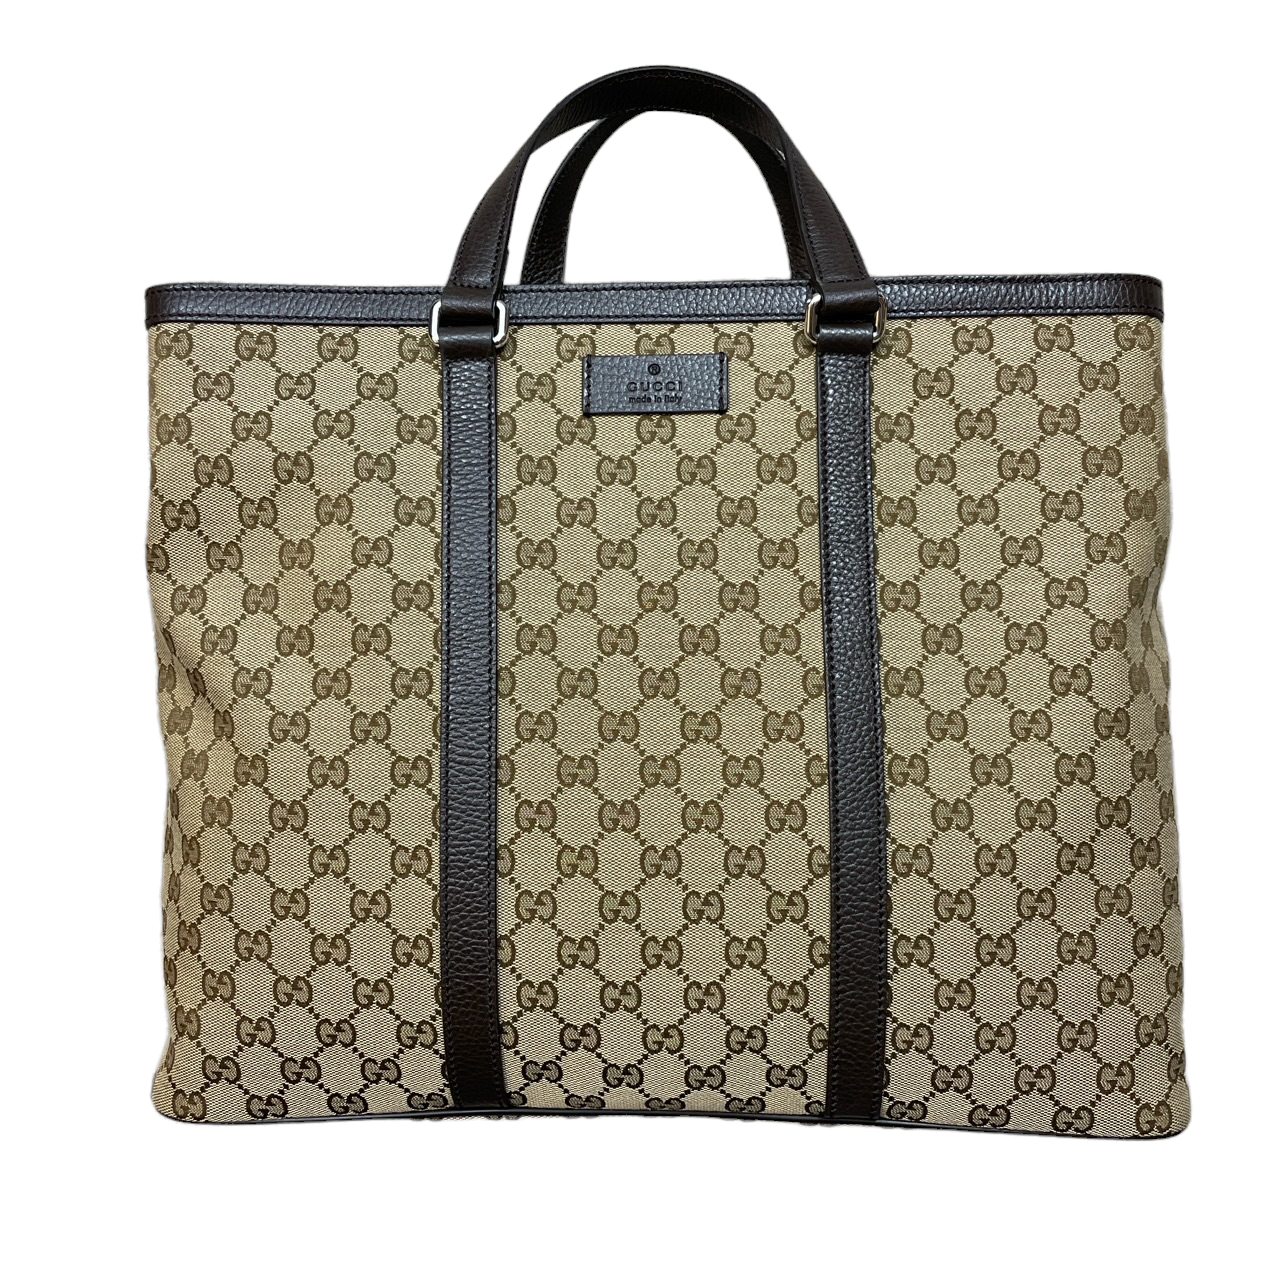 GUCCI GG SUPREME MONOGRAM CANVAS LARGE WEEKEND TOTE BAG - – SGN